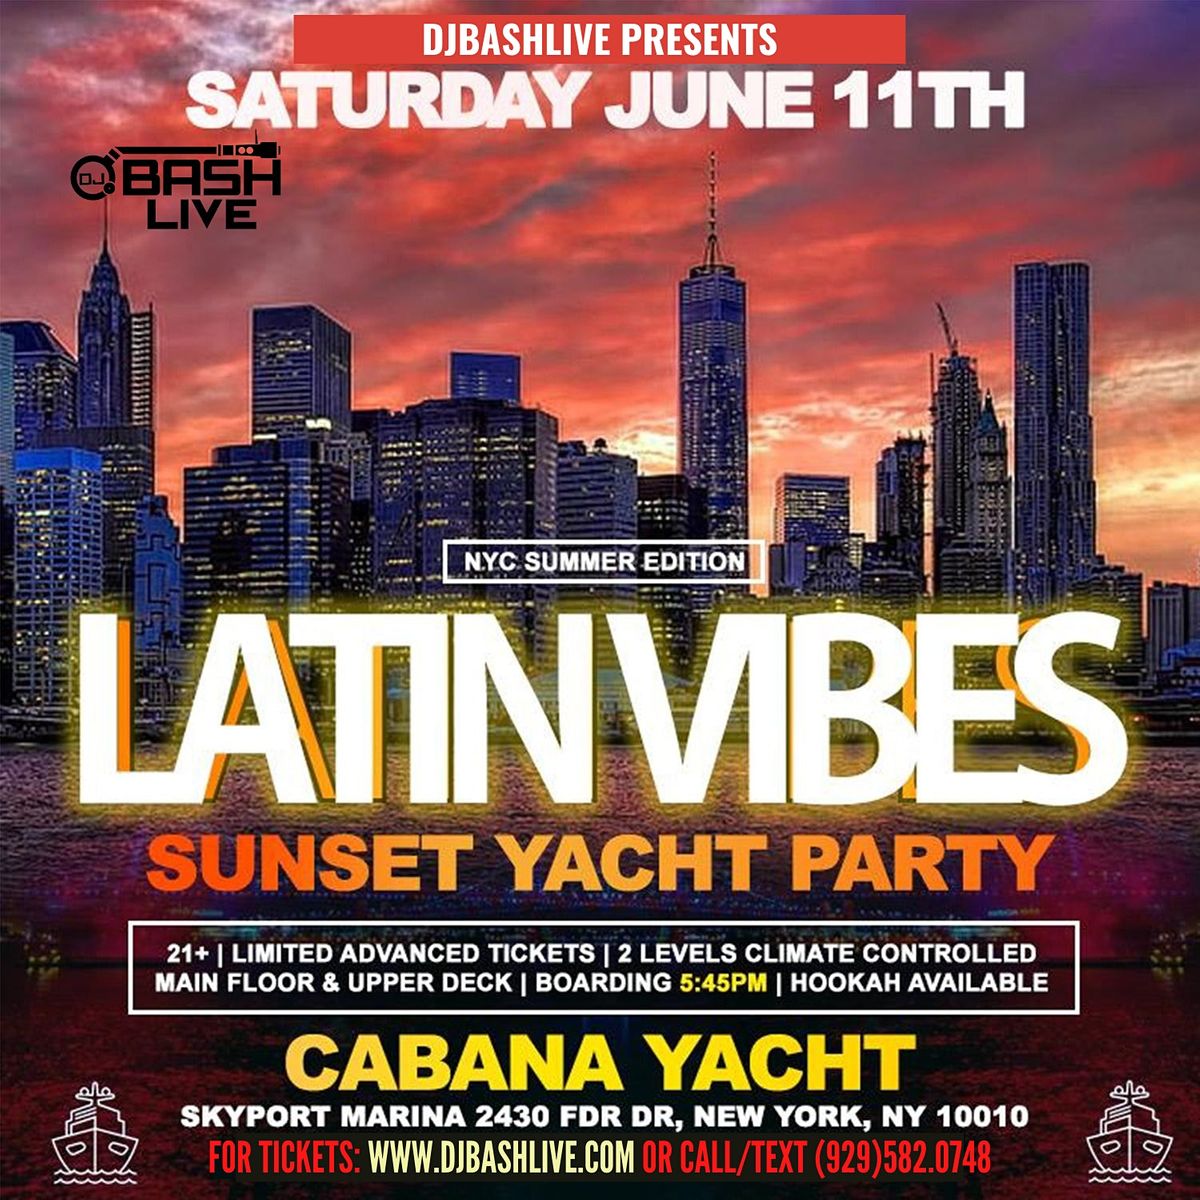 SAT, JUNE 11TH - LATIN VIBES SUNSET YACHT PARTY